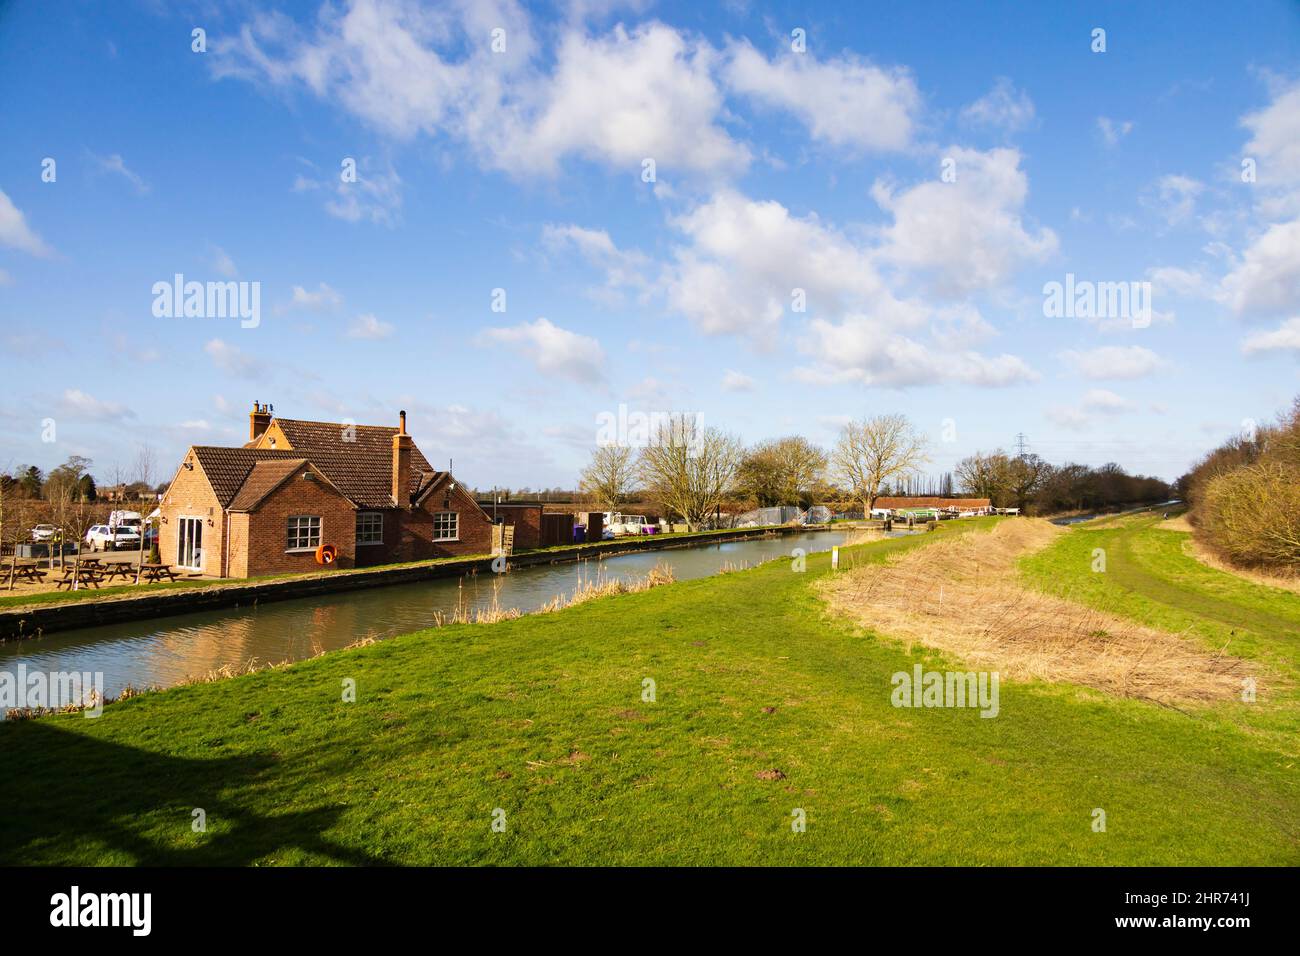 The Rutland Arms, Dirty Duck, Mucky Duck public house on the Grantham Canal, Woolsthorpe by Belvoir, Lincolnshire. Stock Photo